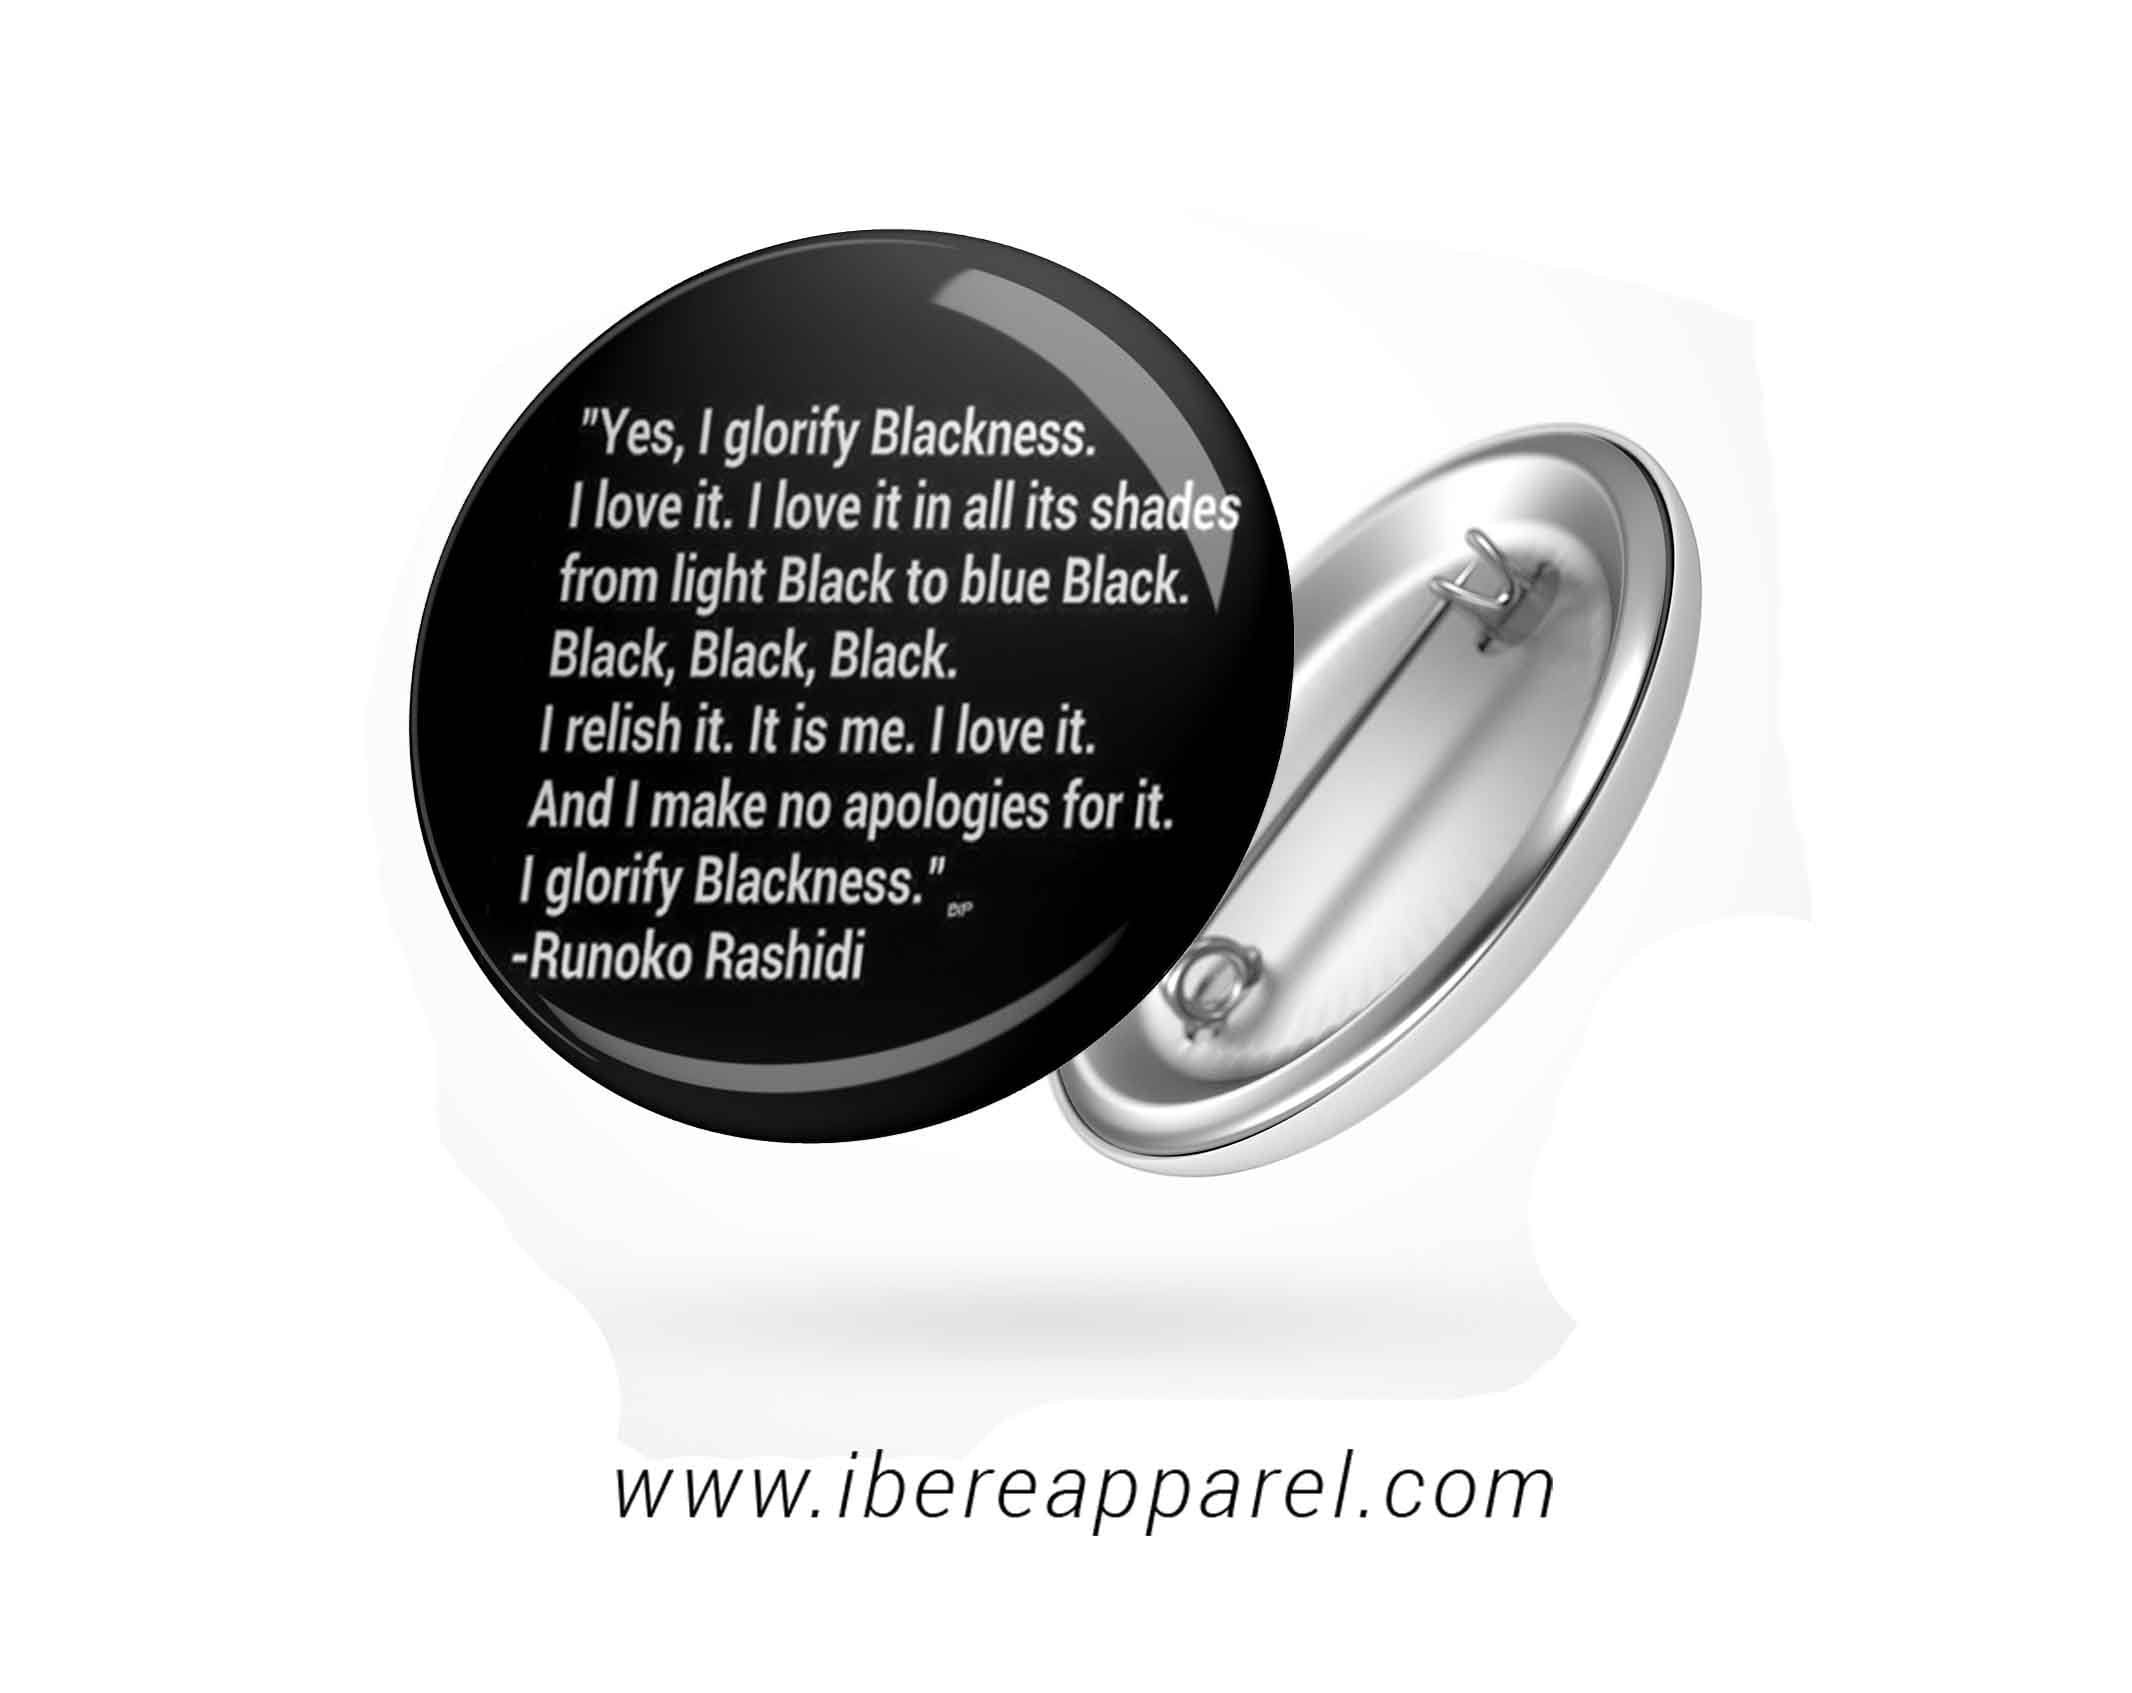 Glorify Blackness Badges, african print fans, black-owned brands, black pound day